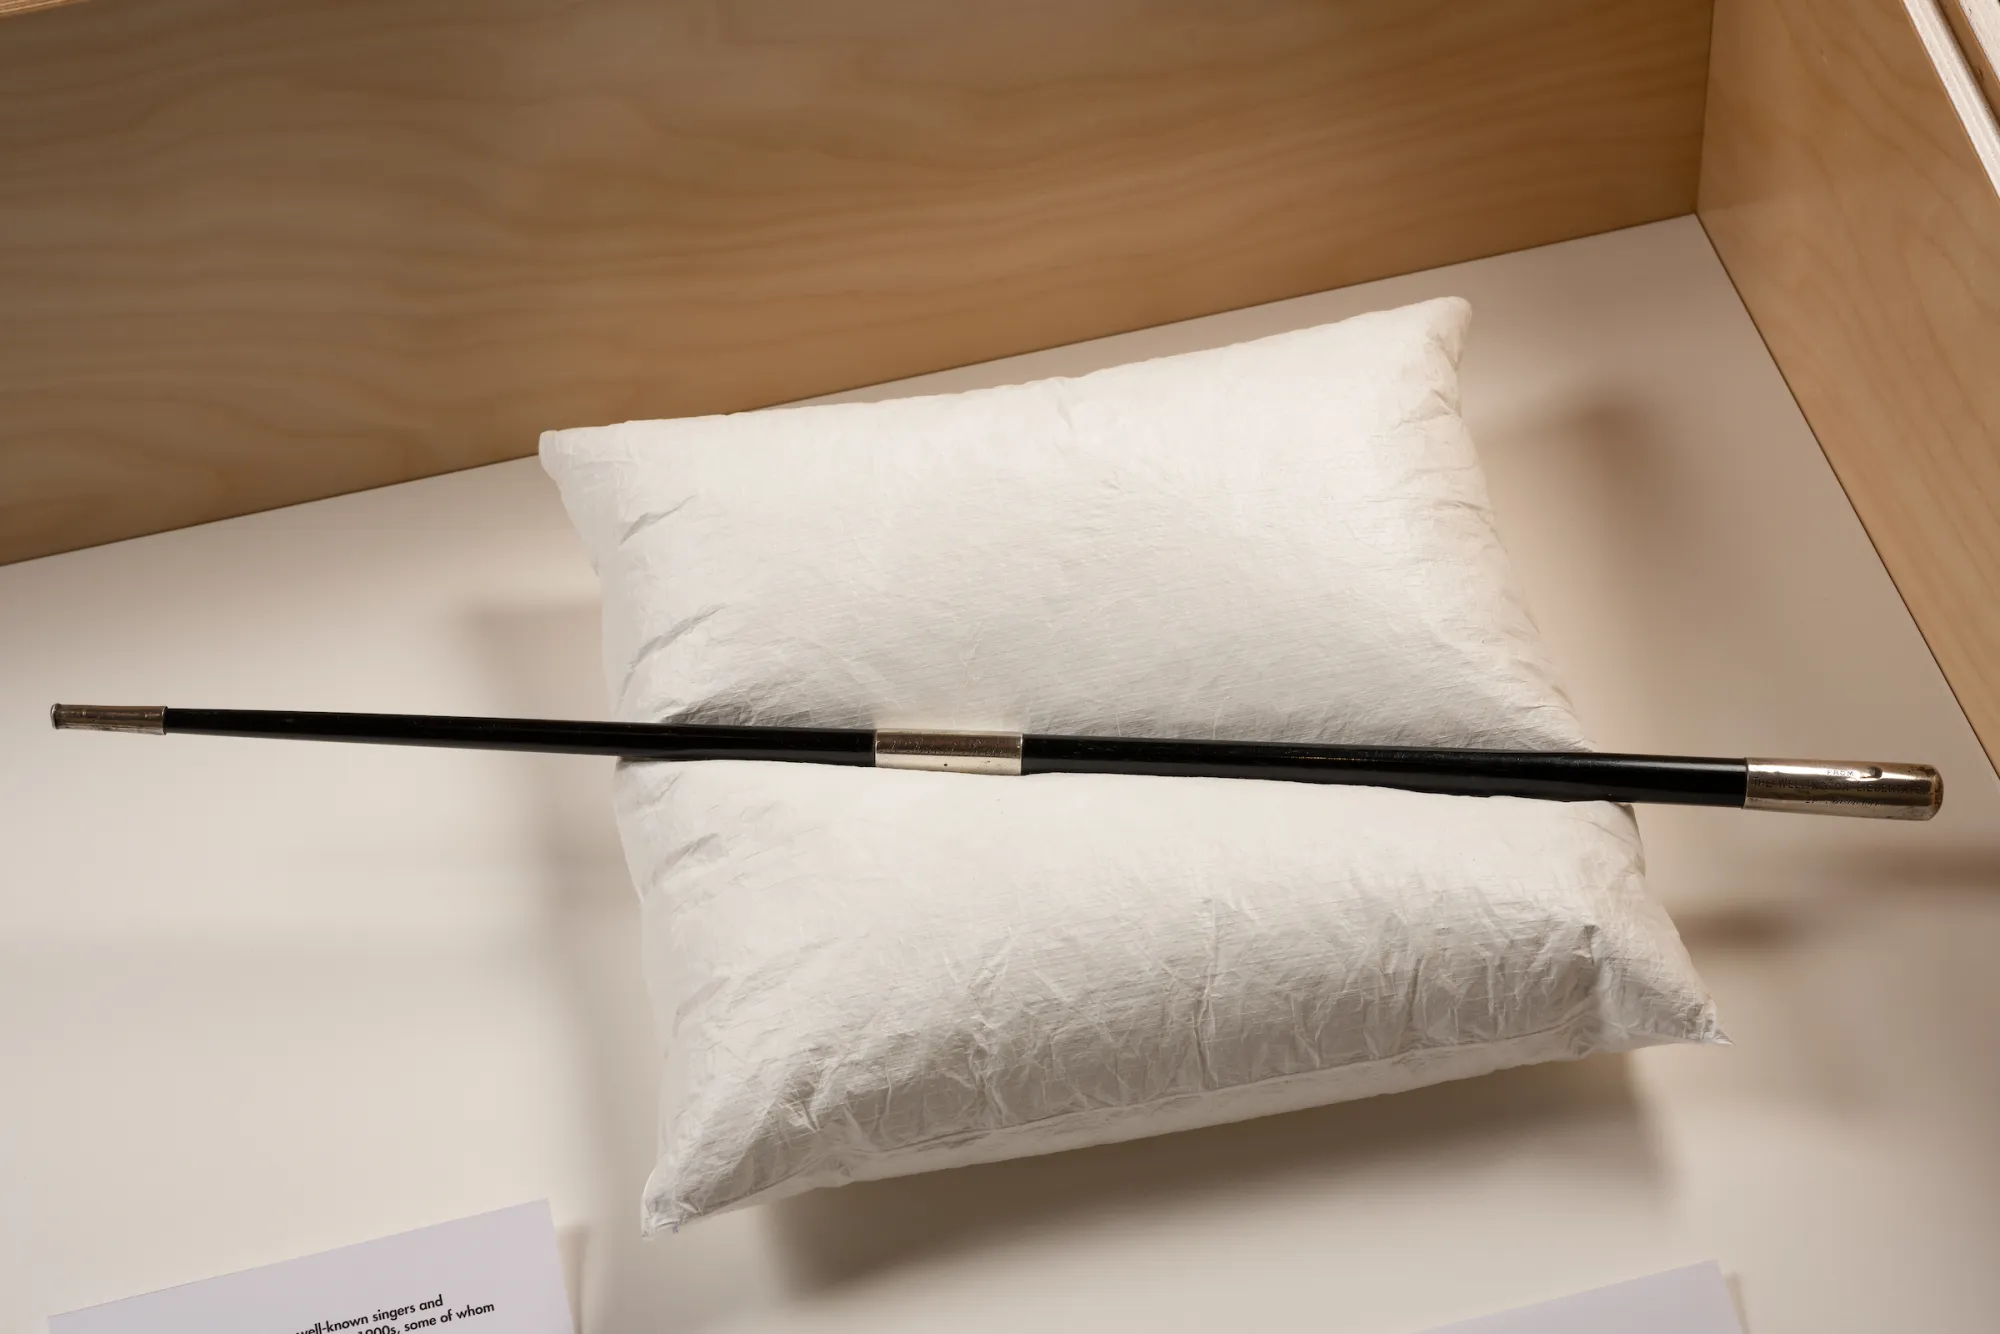 A black conductor's baton with silver ends displayed on a white cushion